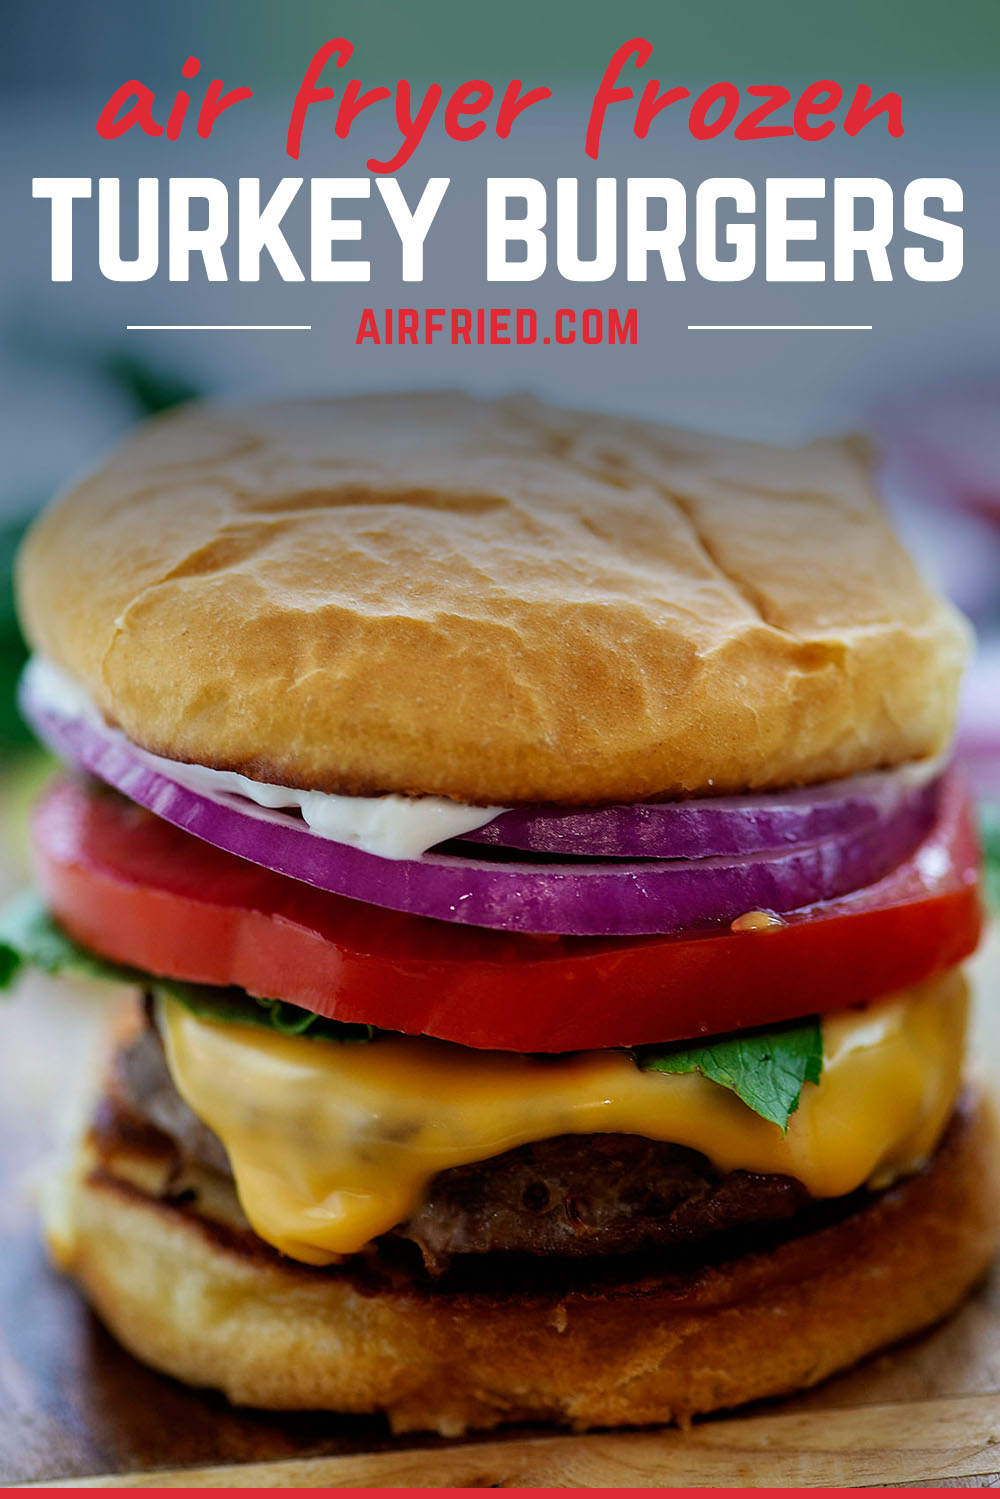 These frozen turkey burgers are a great texture and flavor coming from the air fryer!